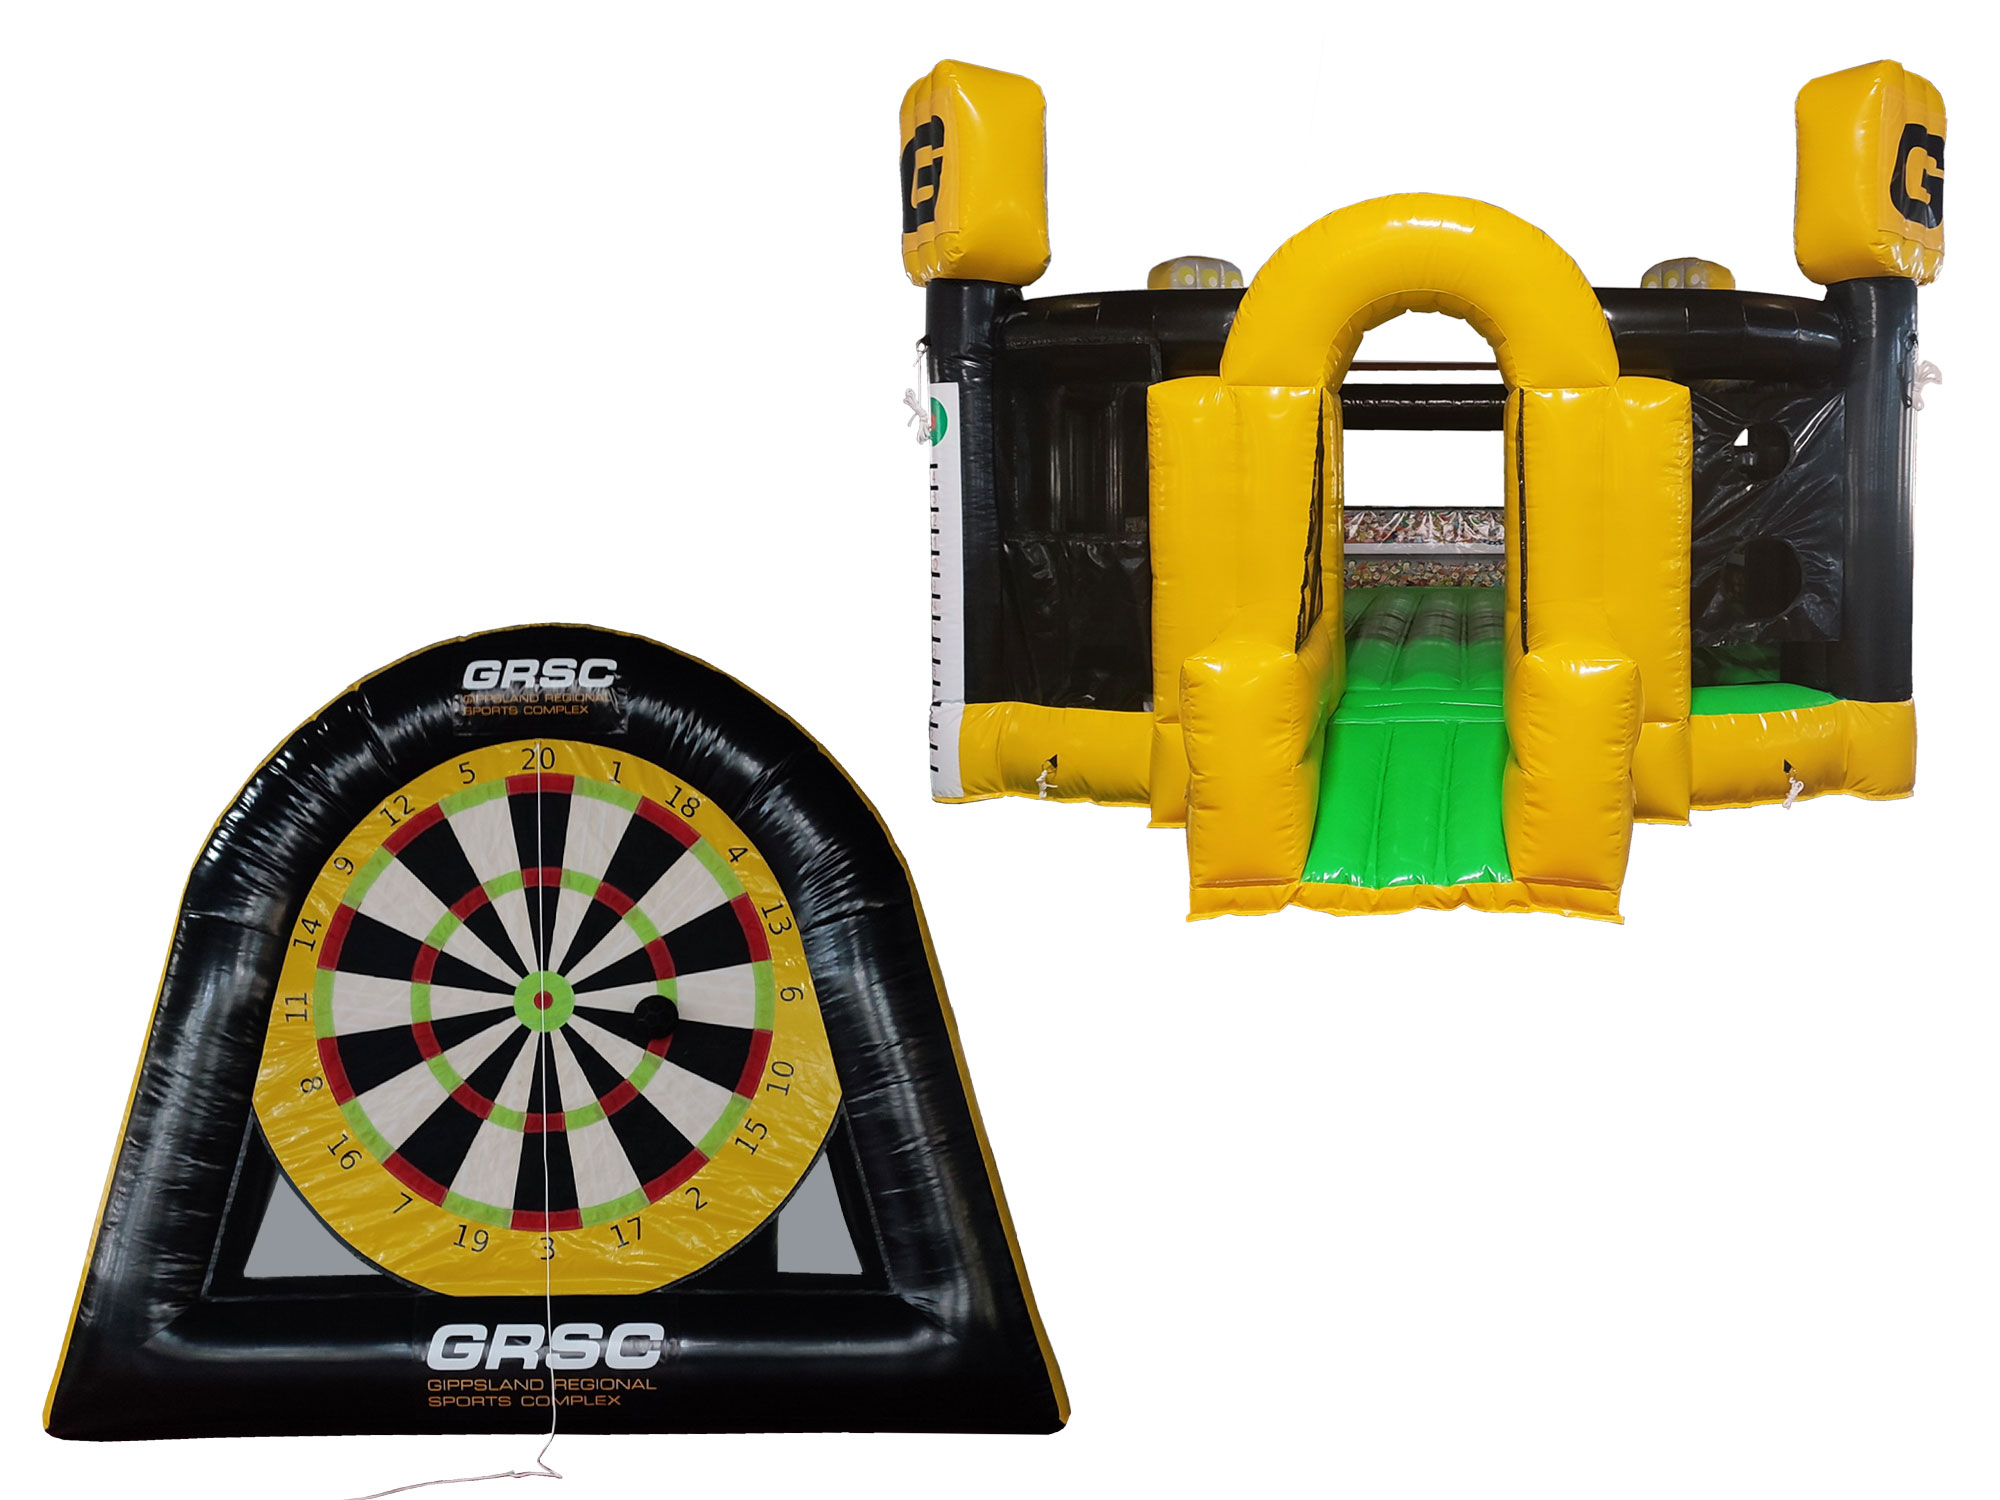 The giant dartboard is very popular among young soccer enthusiasts, while the jumping castle appeals to younger children.